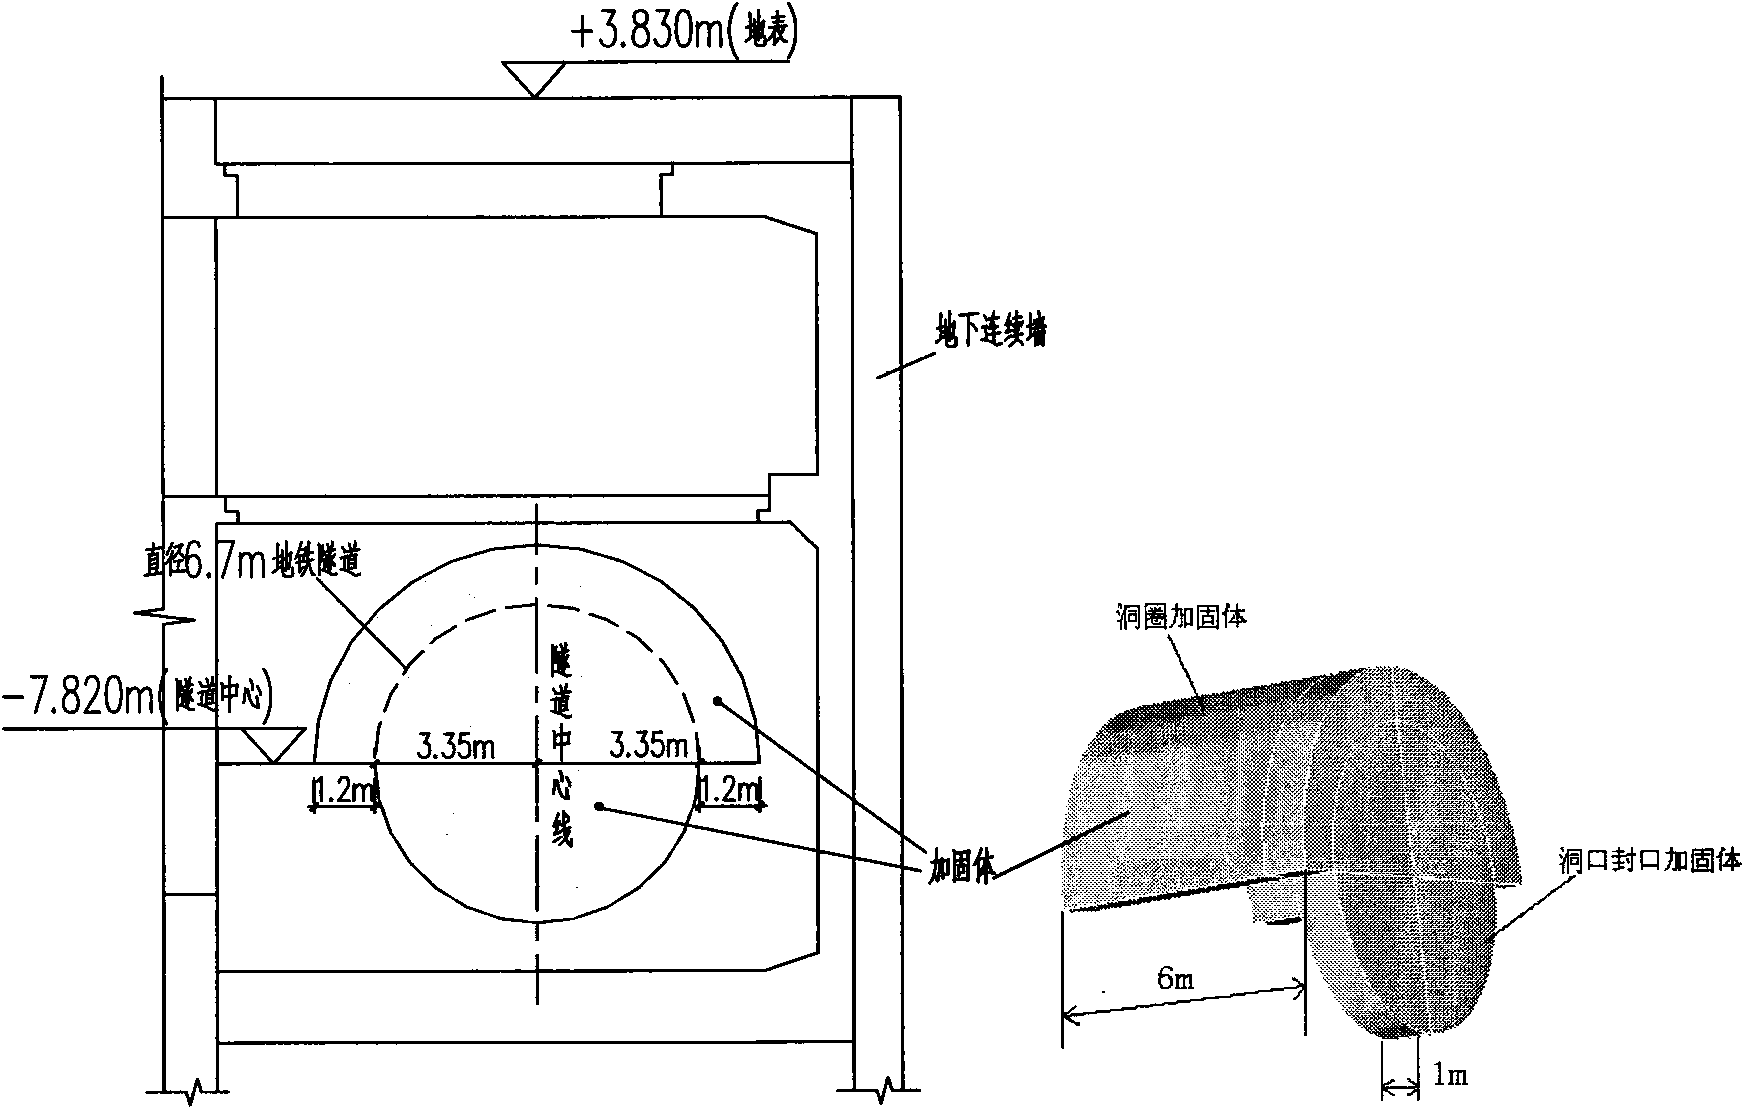 Method of reinforcing soil body for inlet and outlet cave mouths of tunnel shield